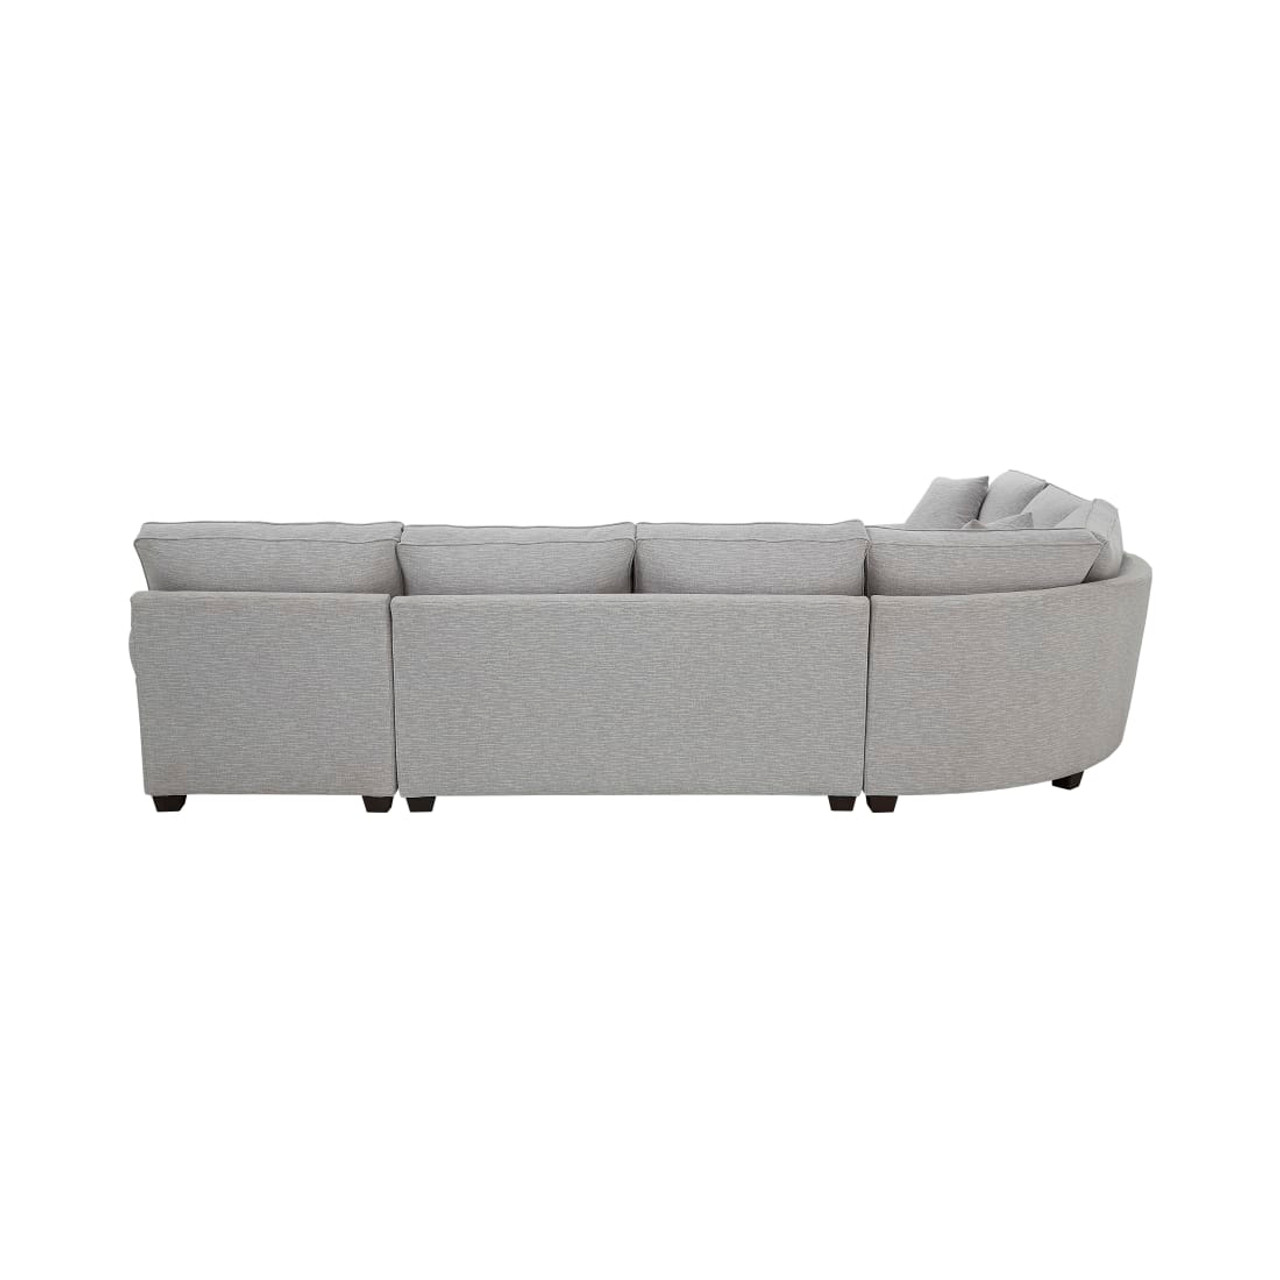 Crestview Rolled Arm Granite 4-pc sectional w/ right chaise